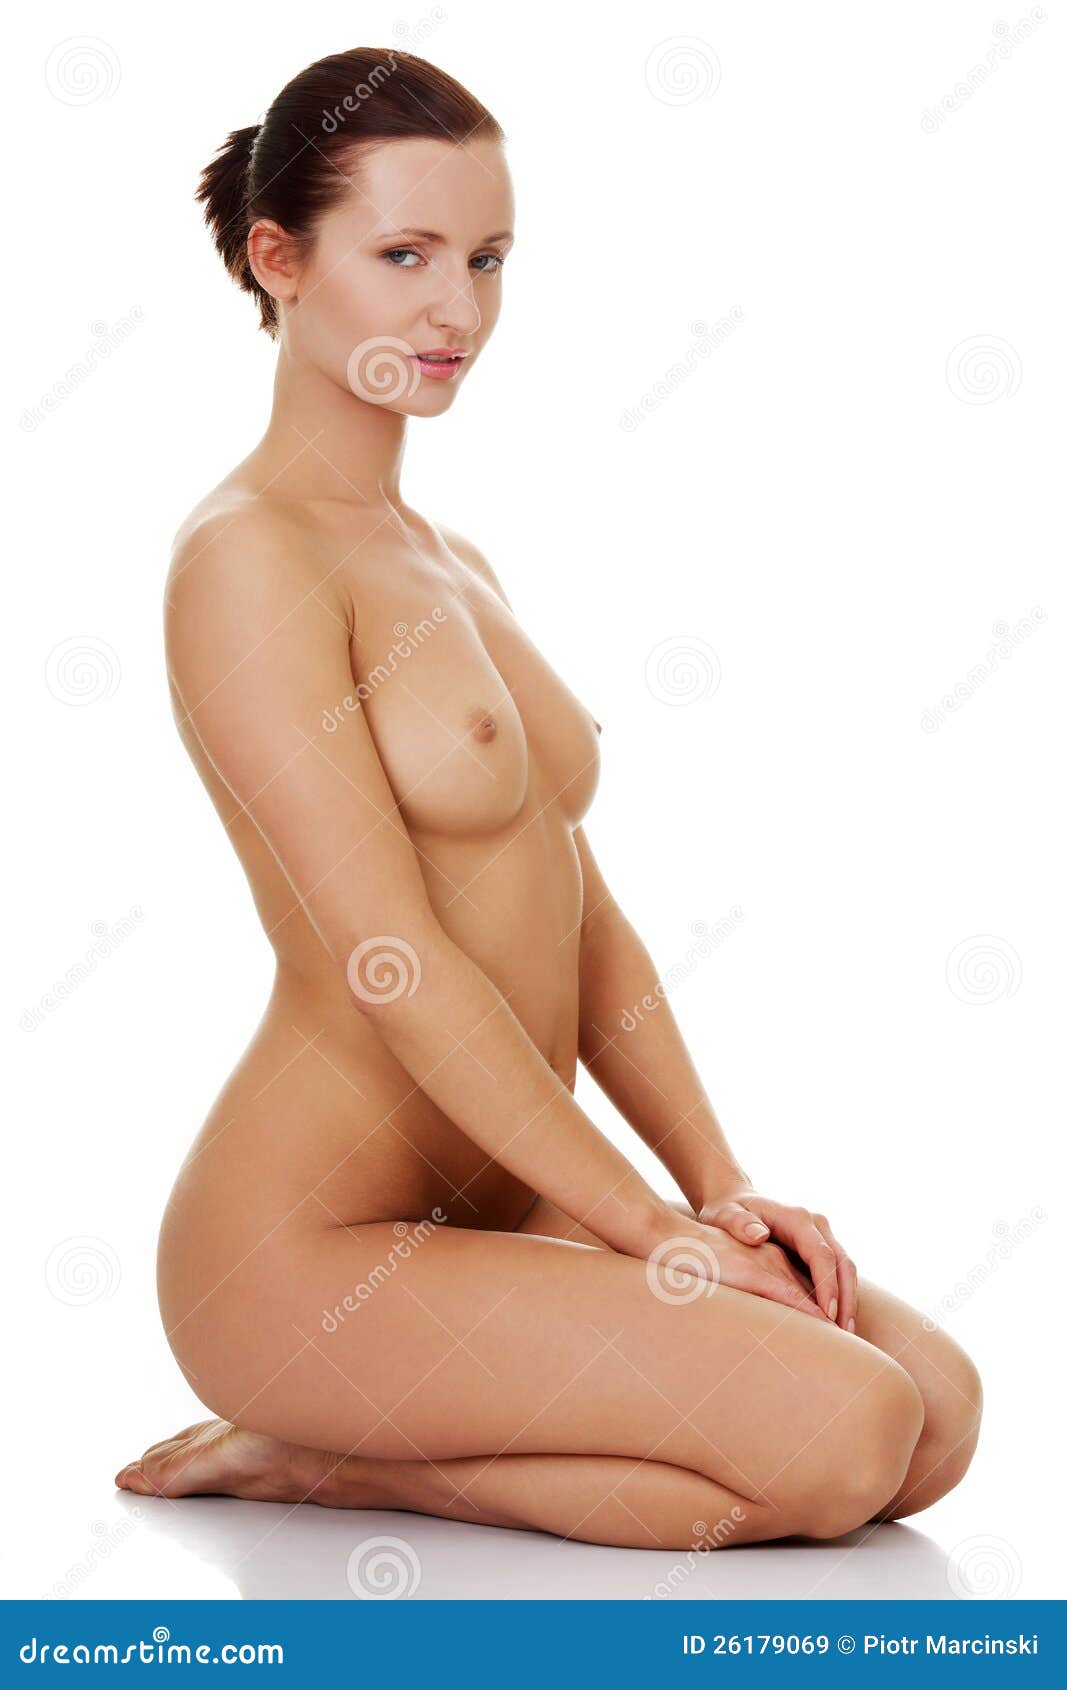 Naked woman sitting on the floor. on white backgound. 